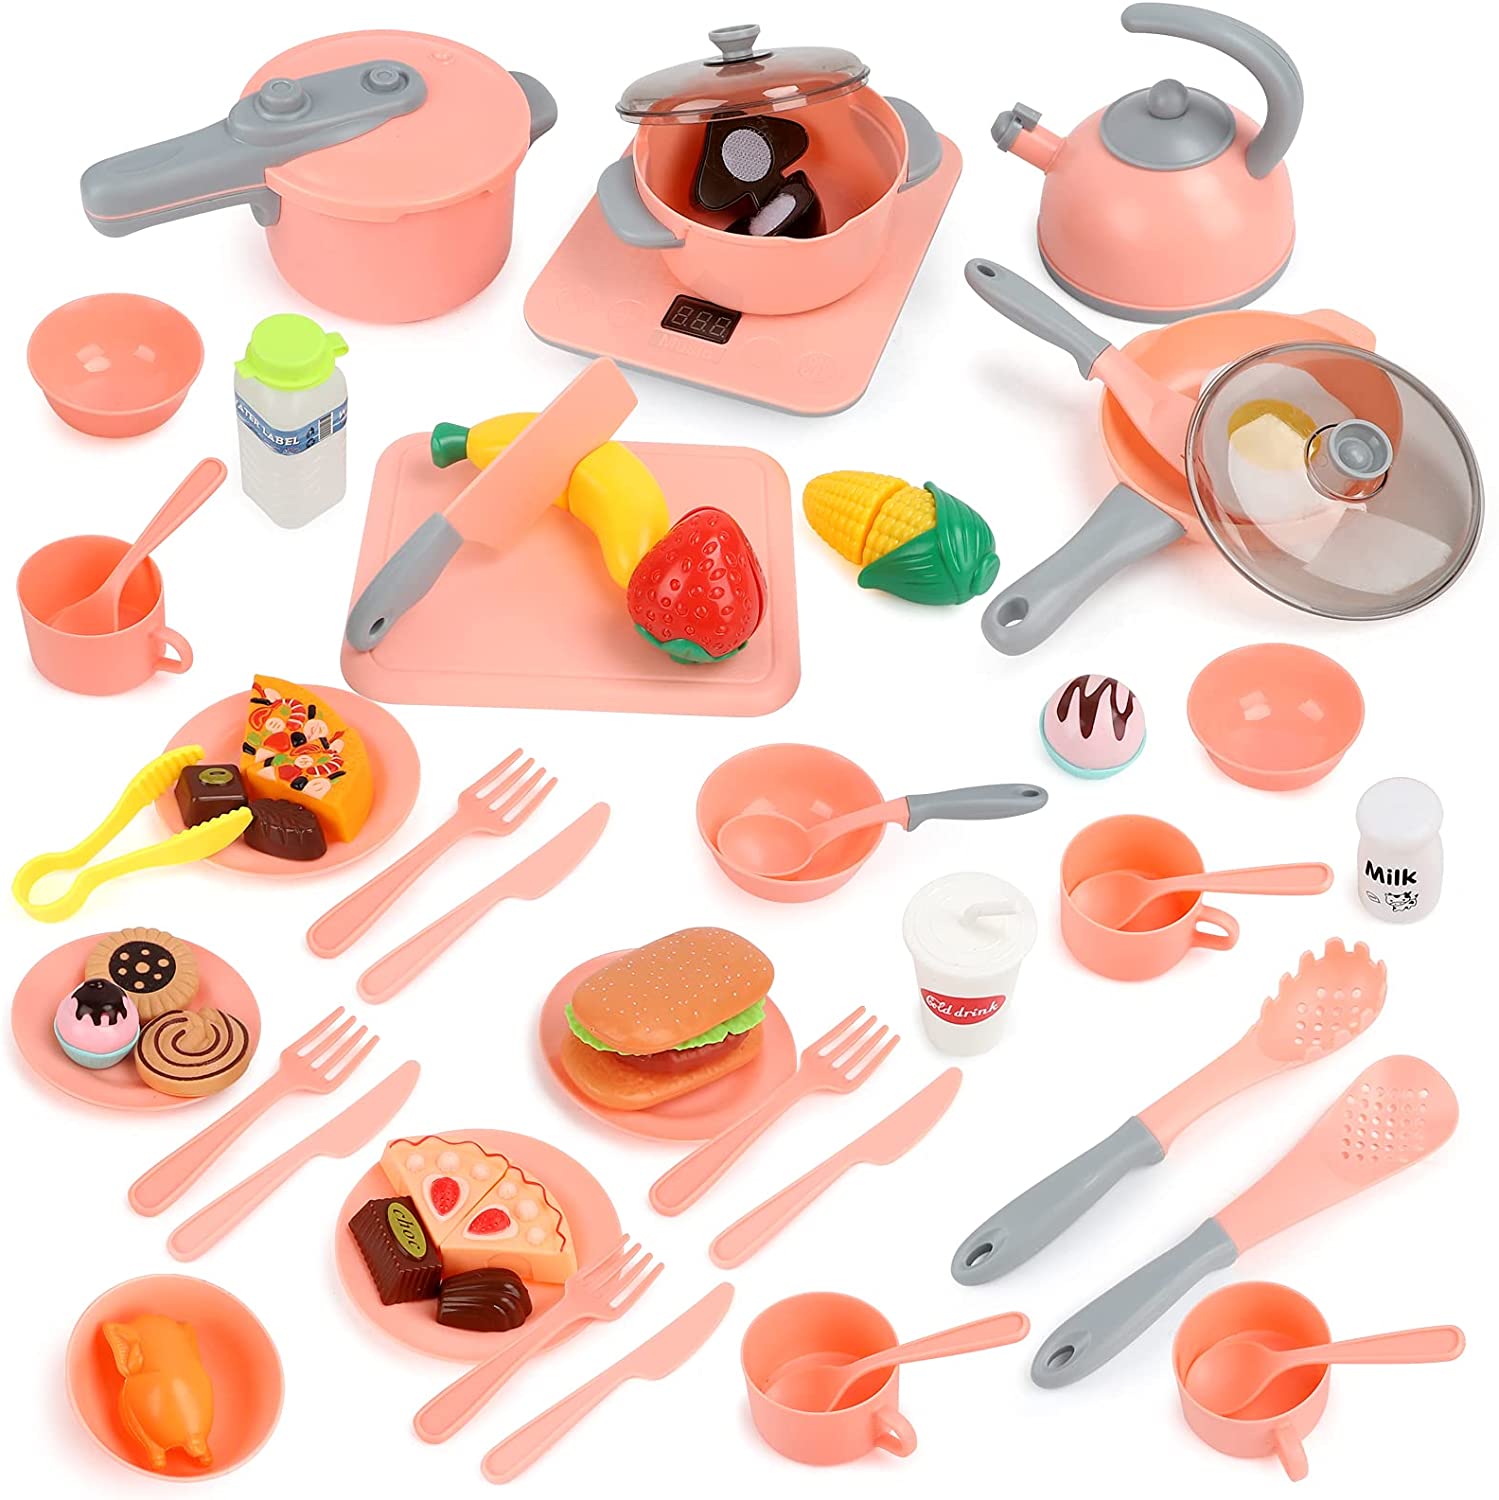 Big discounting Plastic Link Chain Toy - BeebeeRun Kids Kitchen Pretend Play Toys 61PCS Cooking Set for Toddlers Cookware Pots and Pans Playset, Cooking Utensils, Toy Cutlery, Cutting Play Food &#...